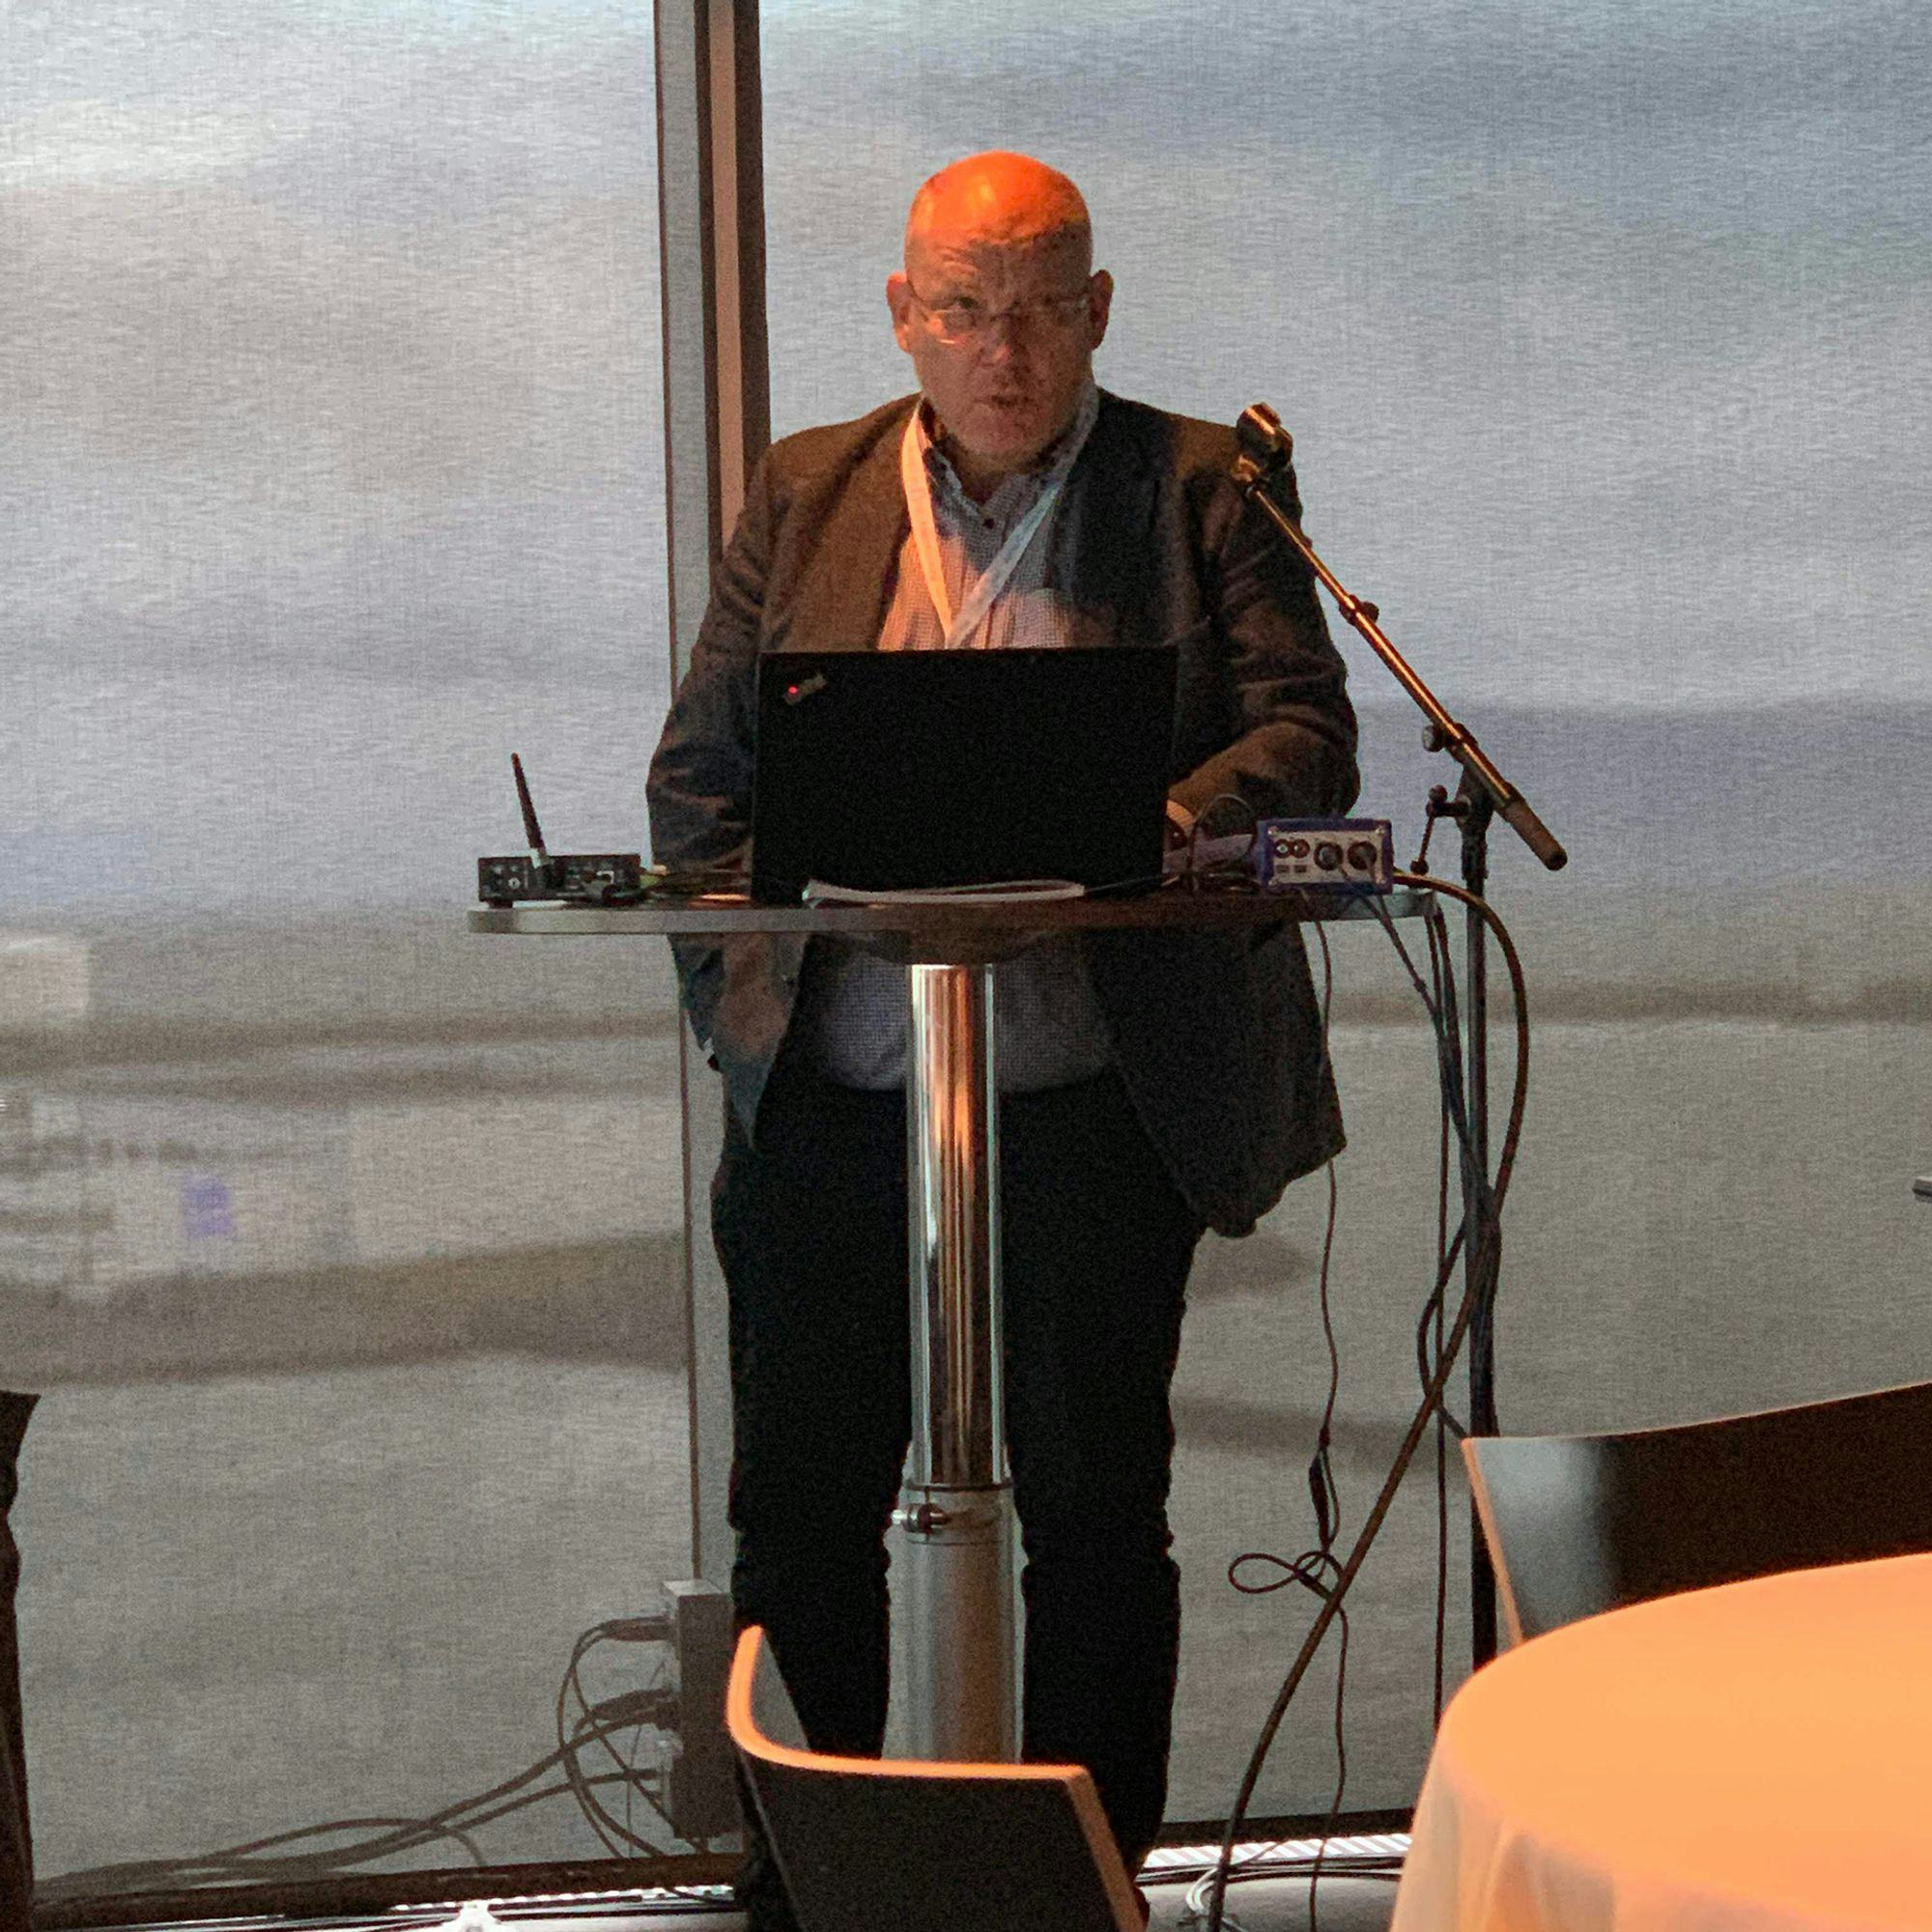 A man speaking at a conference